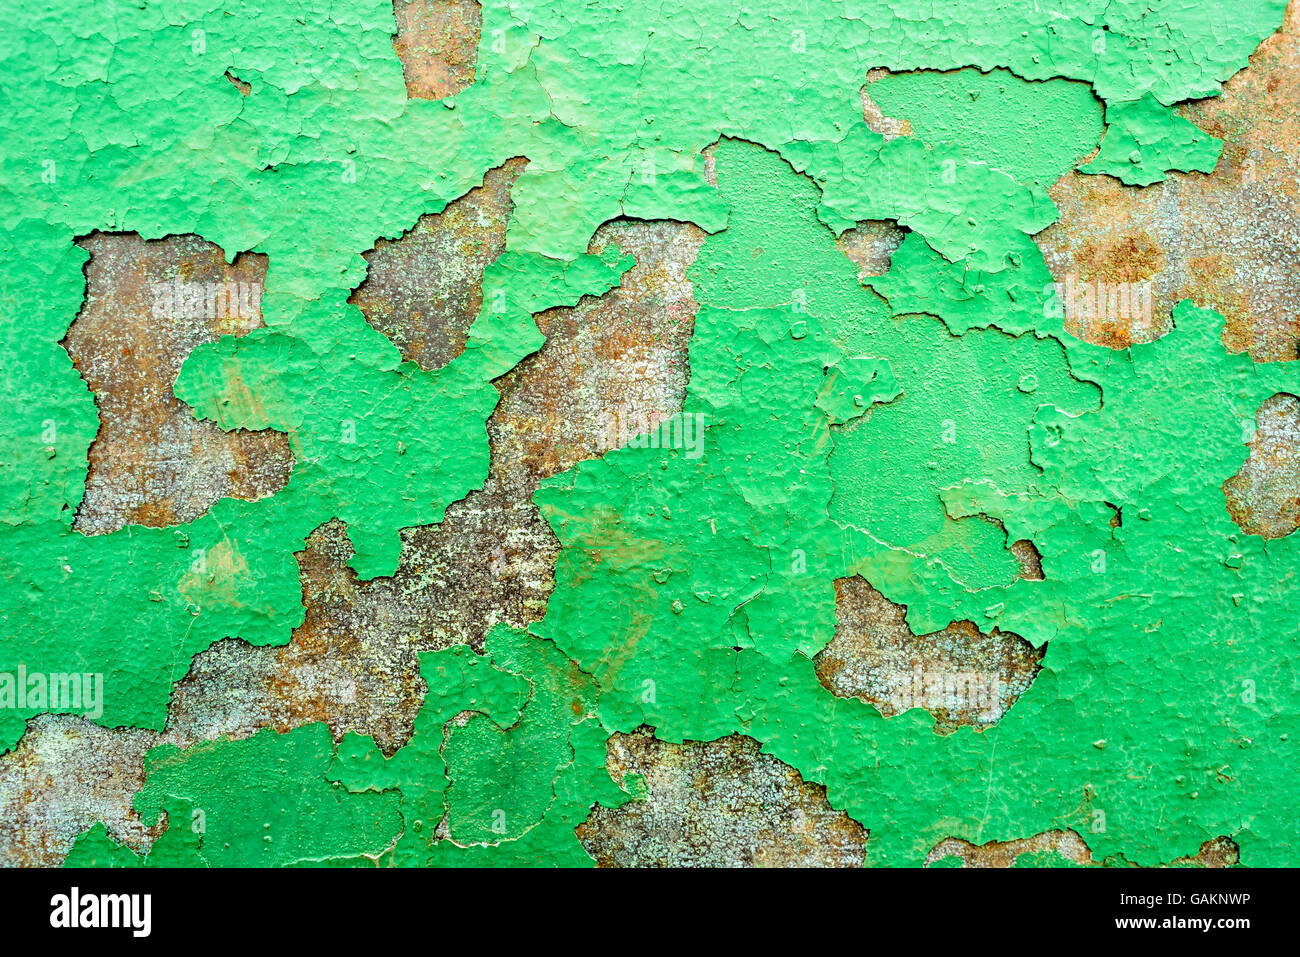 Green flaking paint falling off of a rusty metal surface with split and cracking paints holes. Stock Photo